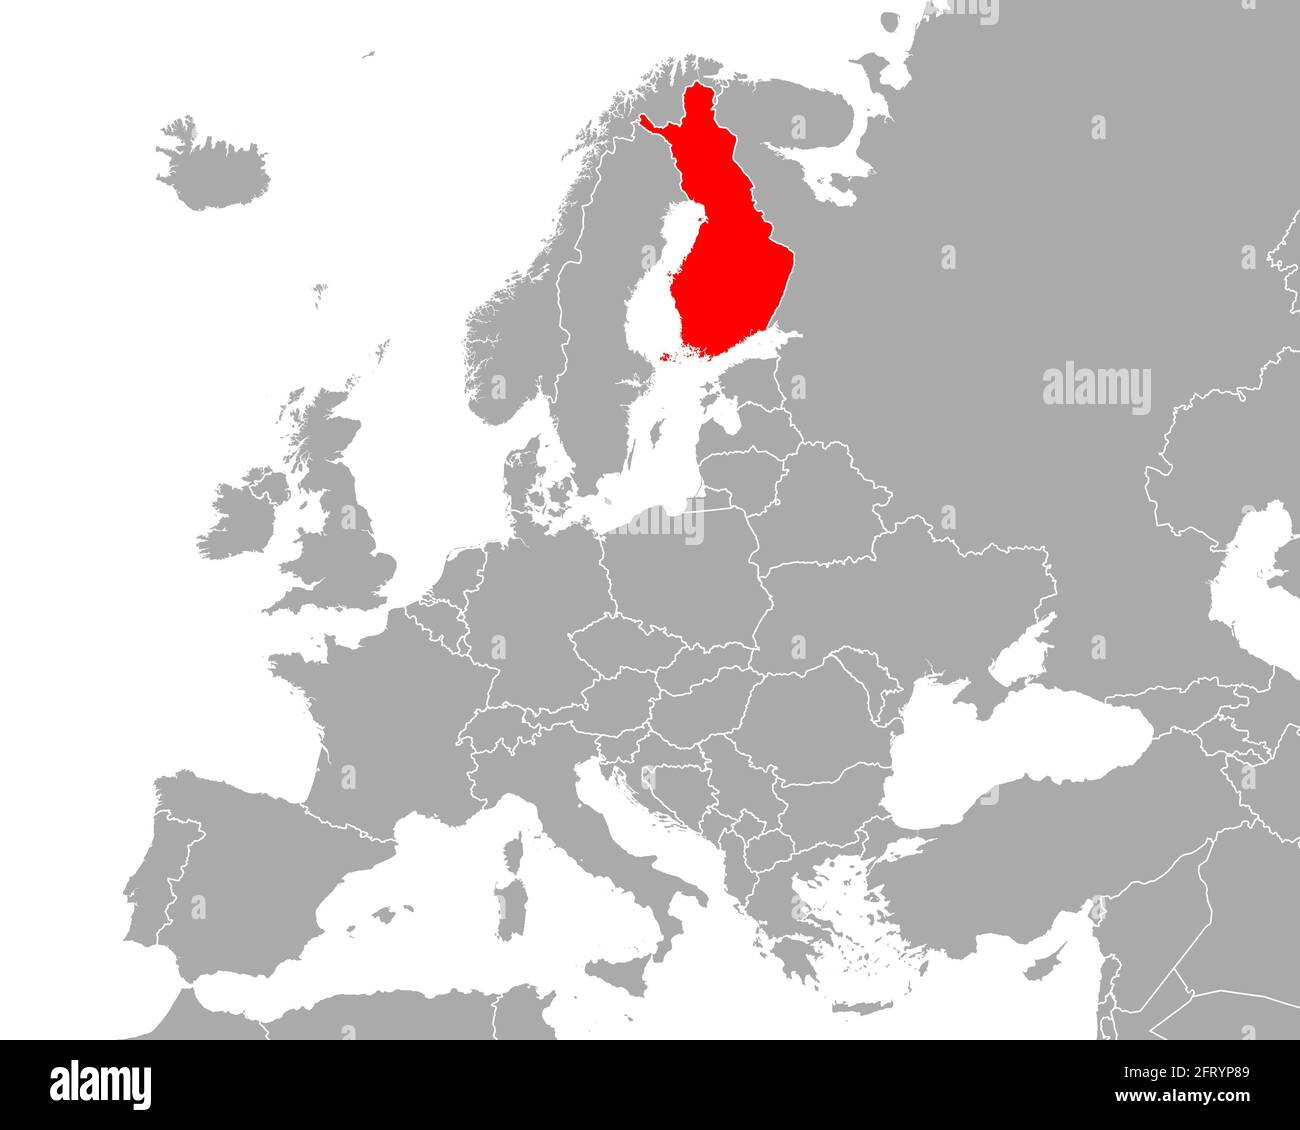 Map of Finland in Europe Stock Photo